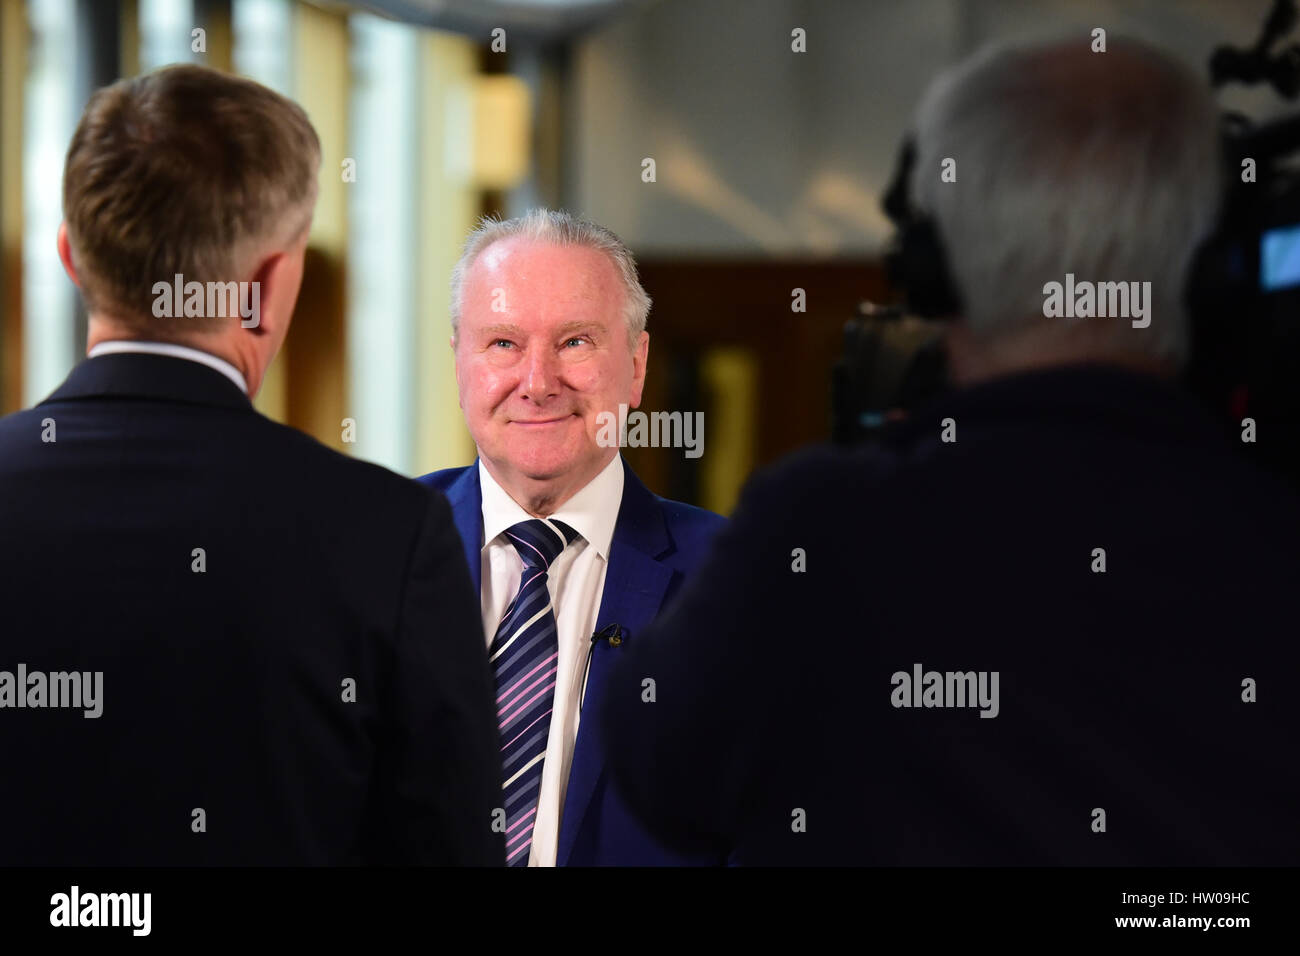 Edinburgh, Scotland, UK. 14th March 2017. SNP MSP Alex Neil, who voted for Brexit, gives a TV interview in the Scottish Parliament on the day after First Minister Nicola Sturgeon announced she will seek approval to hold another referendum on Scottish independence, citing the UK Government's supposed reluctance to make a separate case for Scotland in Brexit negotiations, Credit: Ken Jack/Alamy Live News Stock Photo